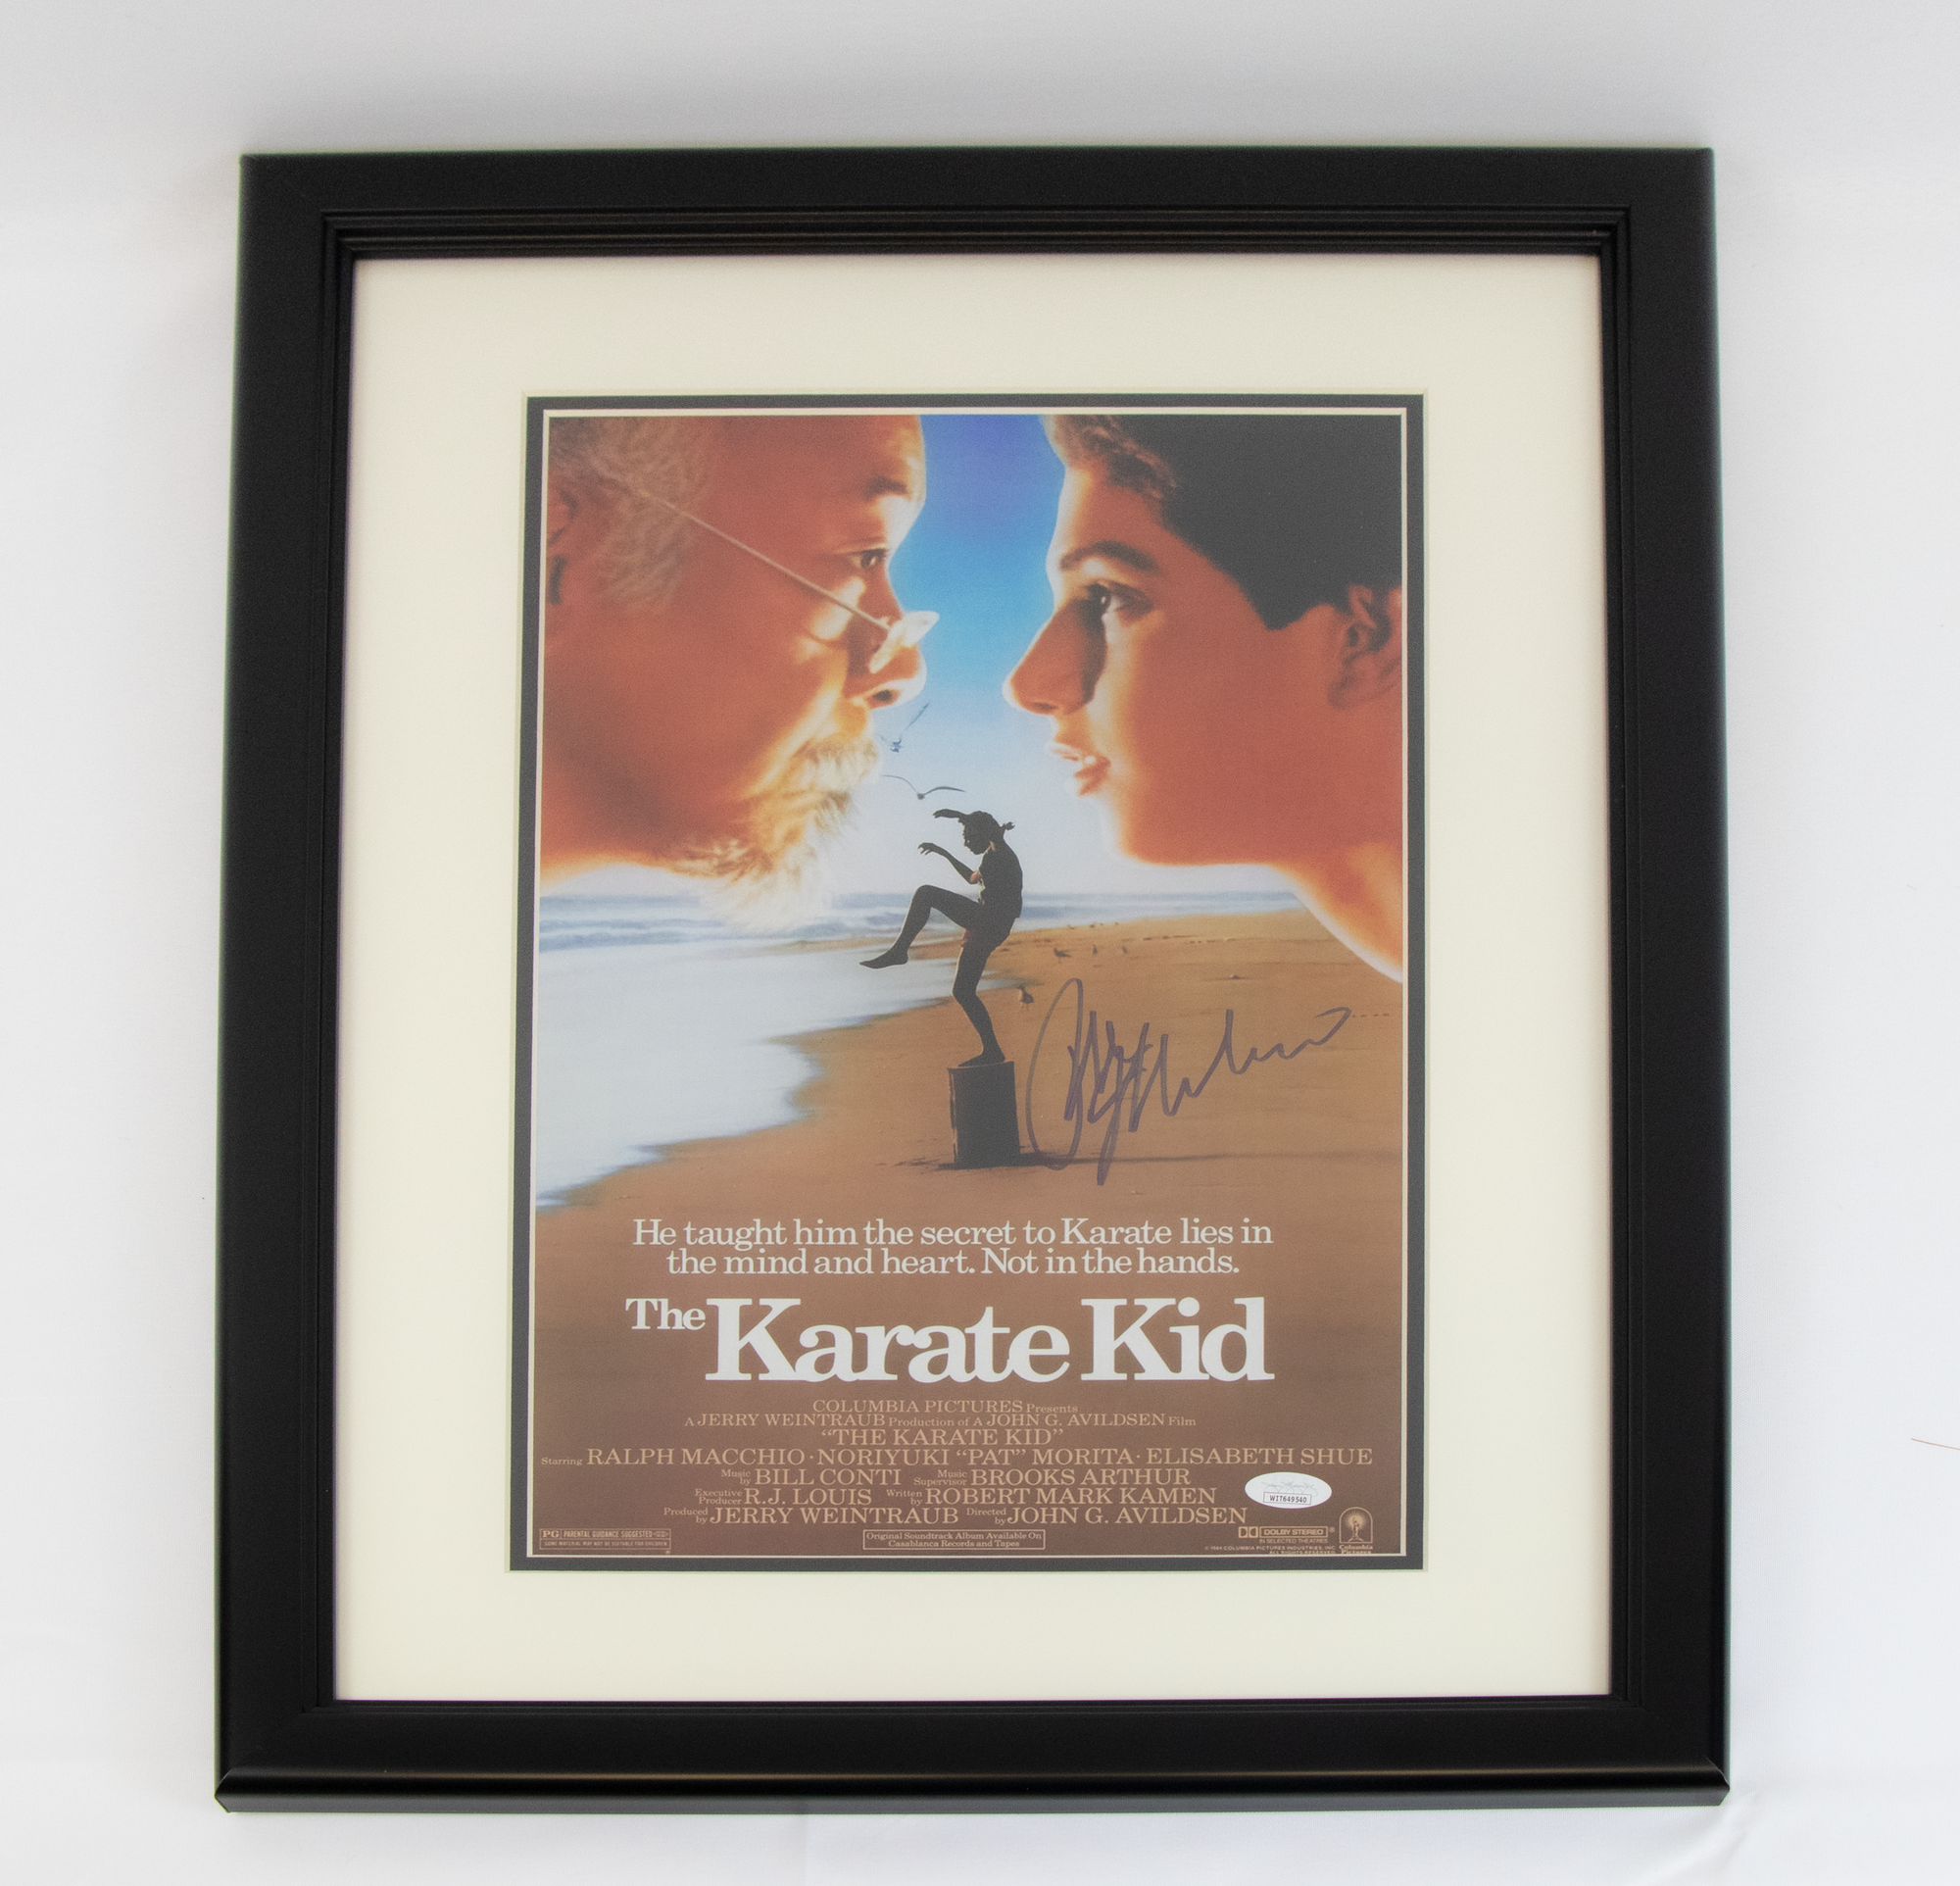 Ralph Macchio Autographed 11x17 "Karate Kid" Movie Poster Framed